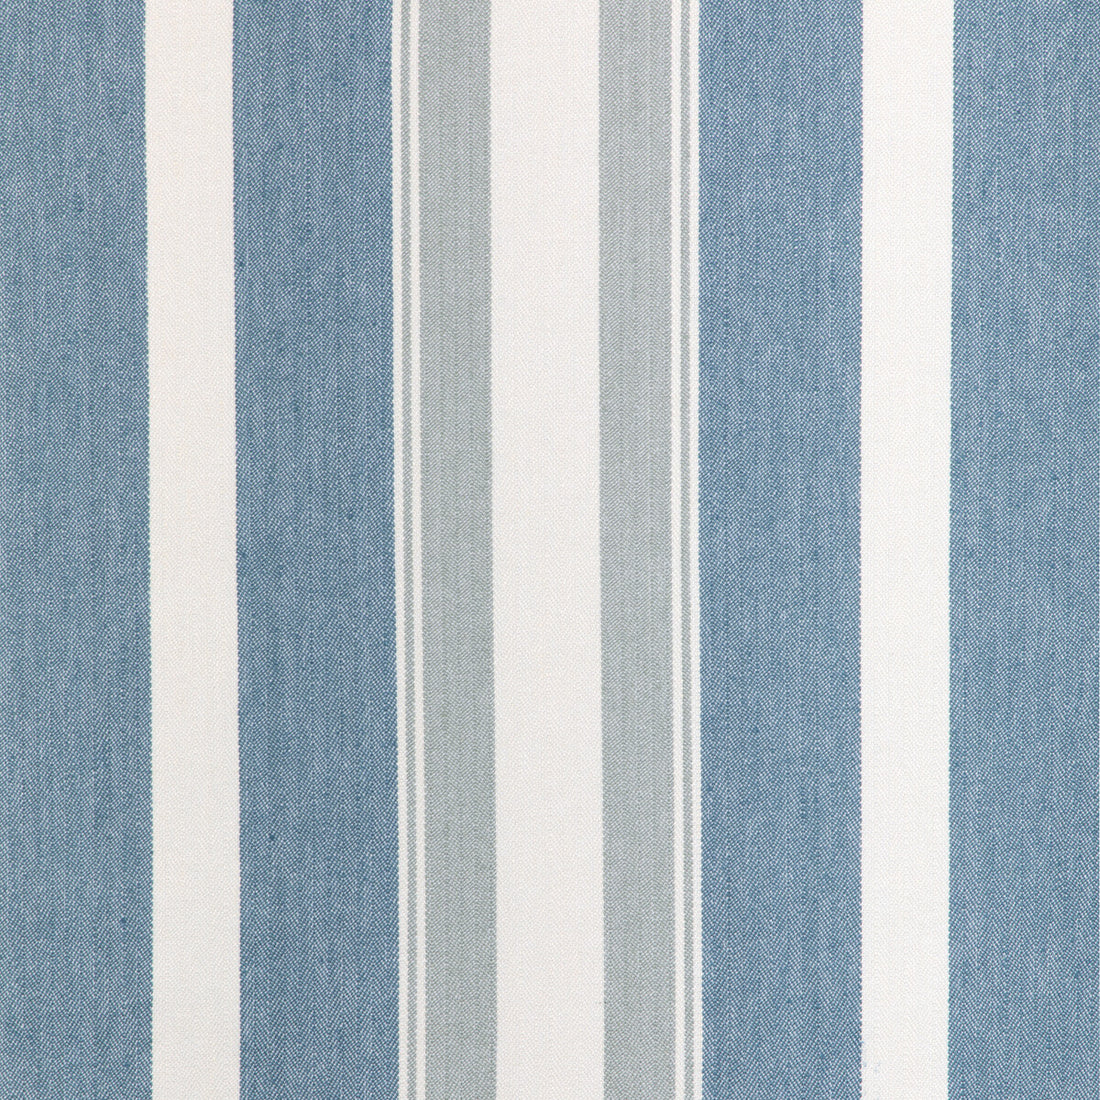 Natural Stripe fabric in lapis color - pattern 36863.5.0 - by Kravet Couture in the Atelier Weaves collection